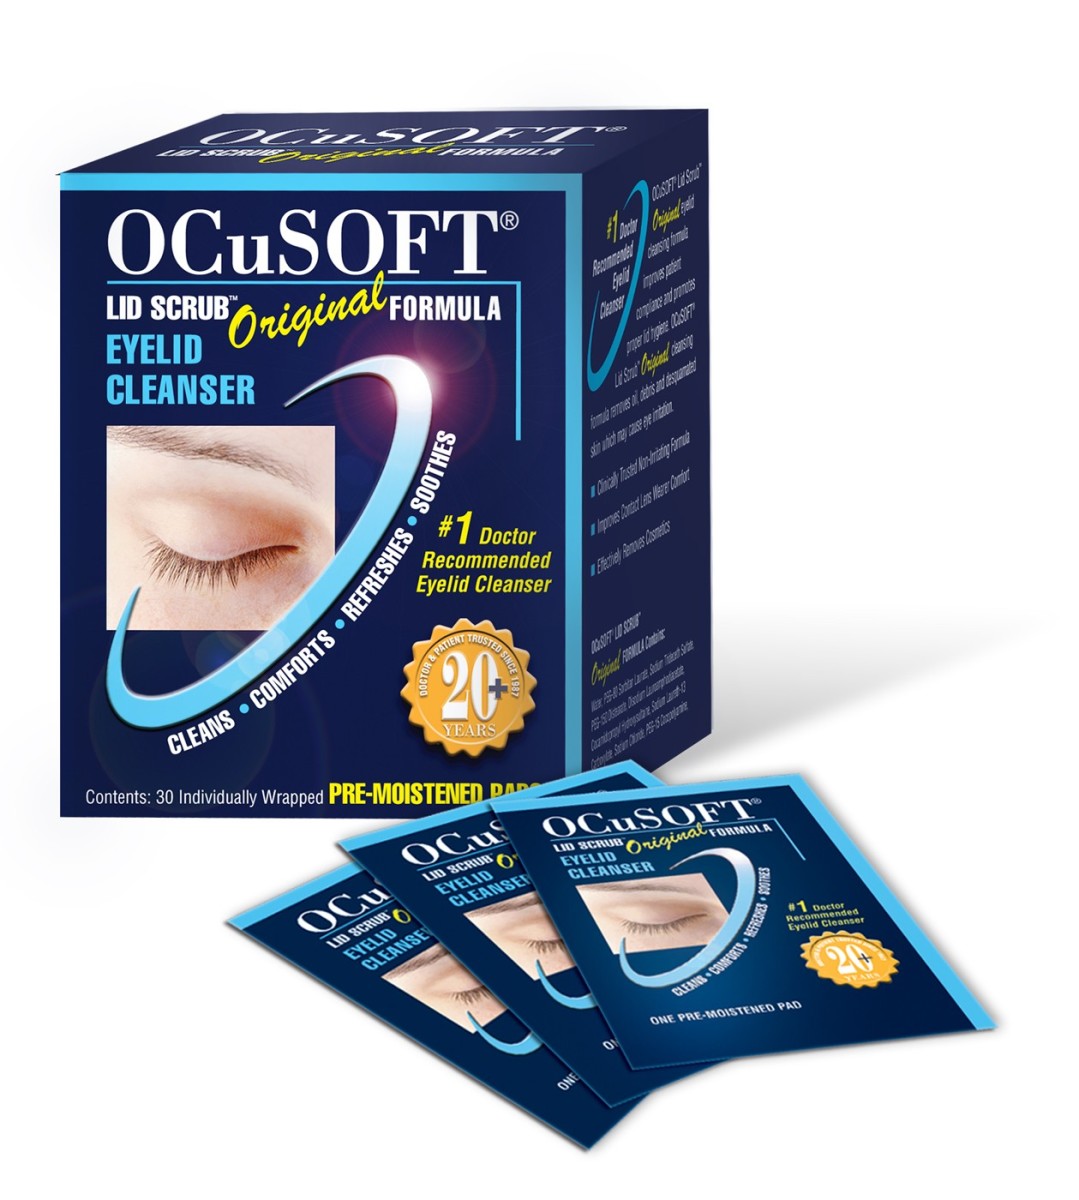 Ocusoft makes an excellent medicated pad for scrubbing the lids. They're easy to use as well—just wet and scrub!